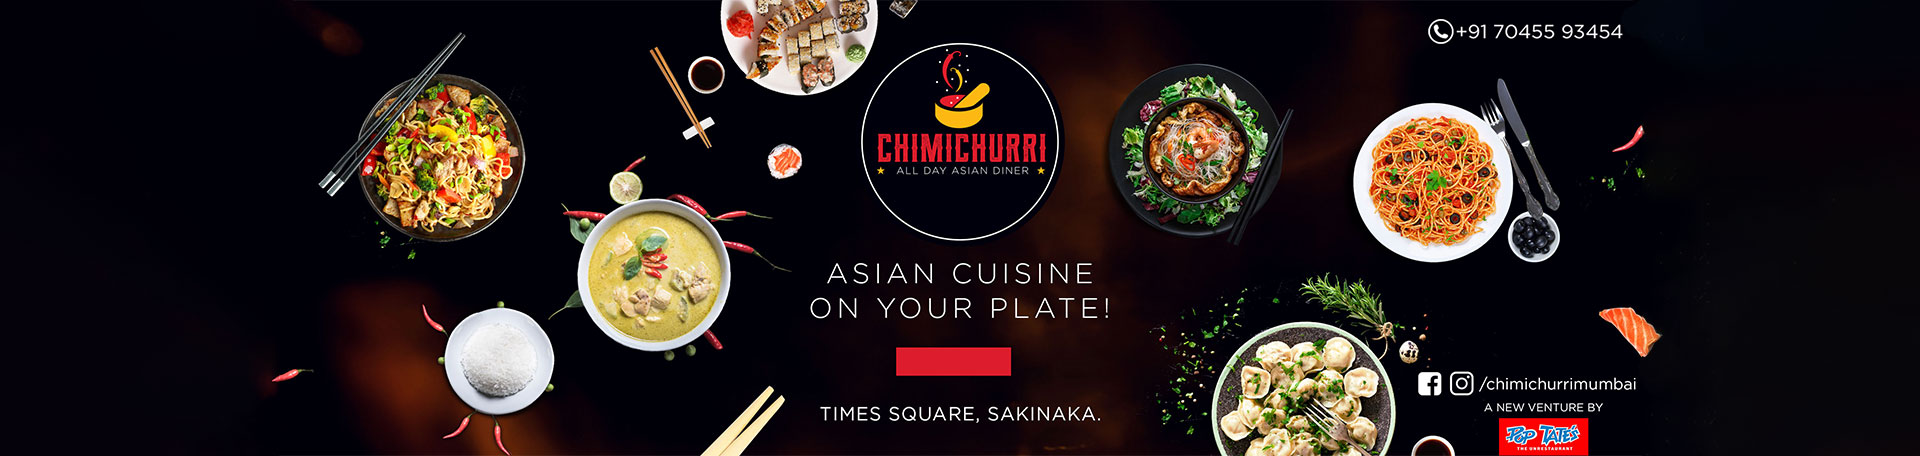 Case Study of Chimichurri by an Online Marketing Agency